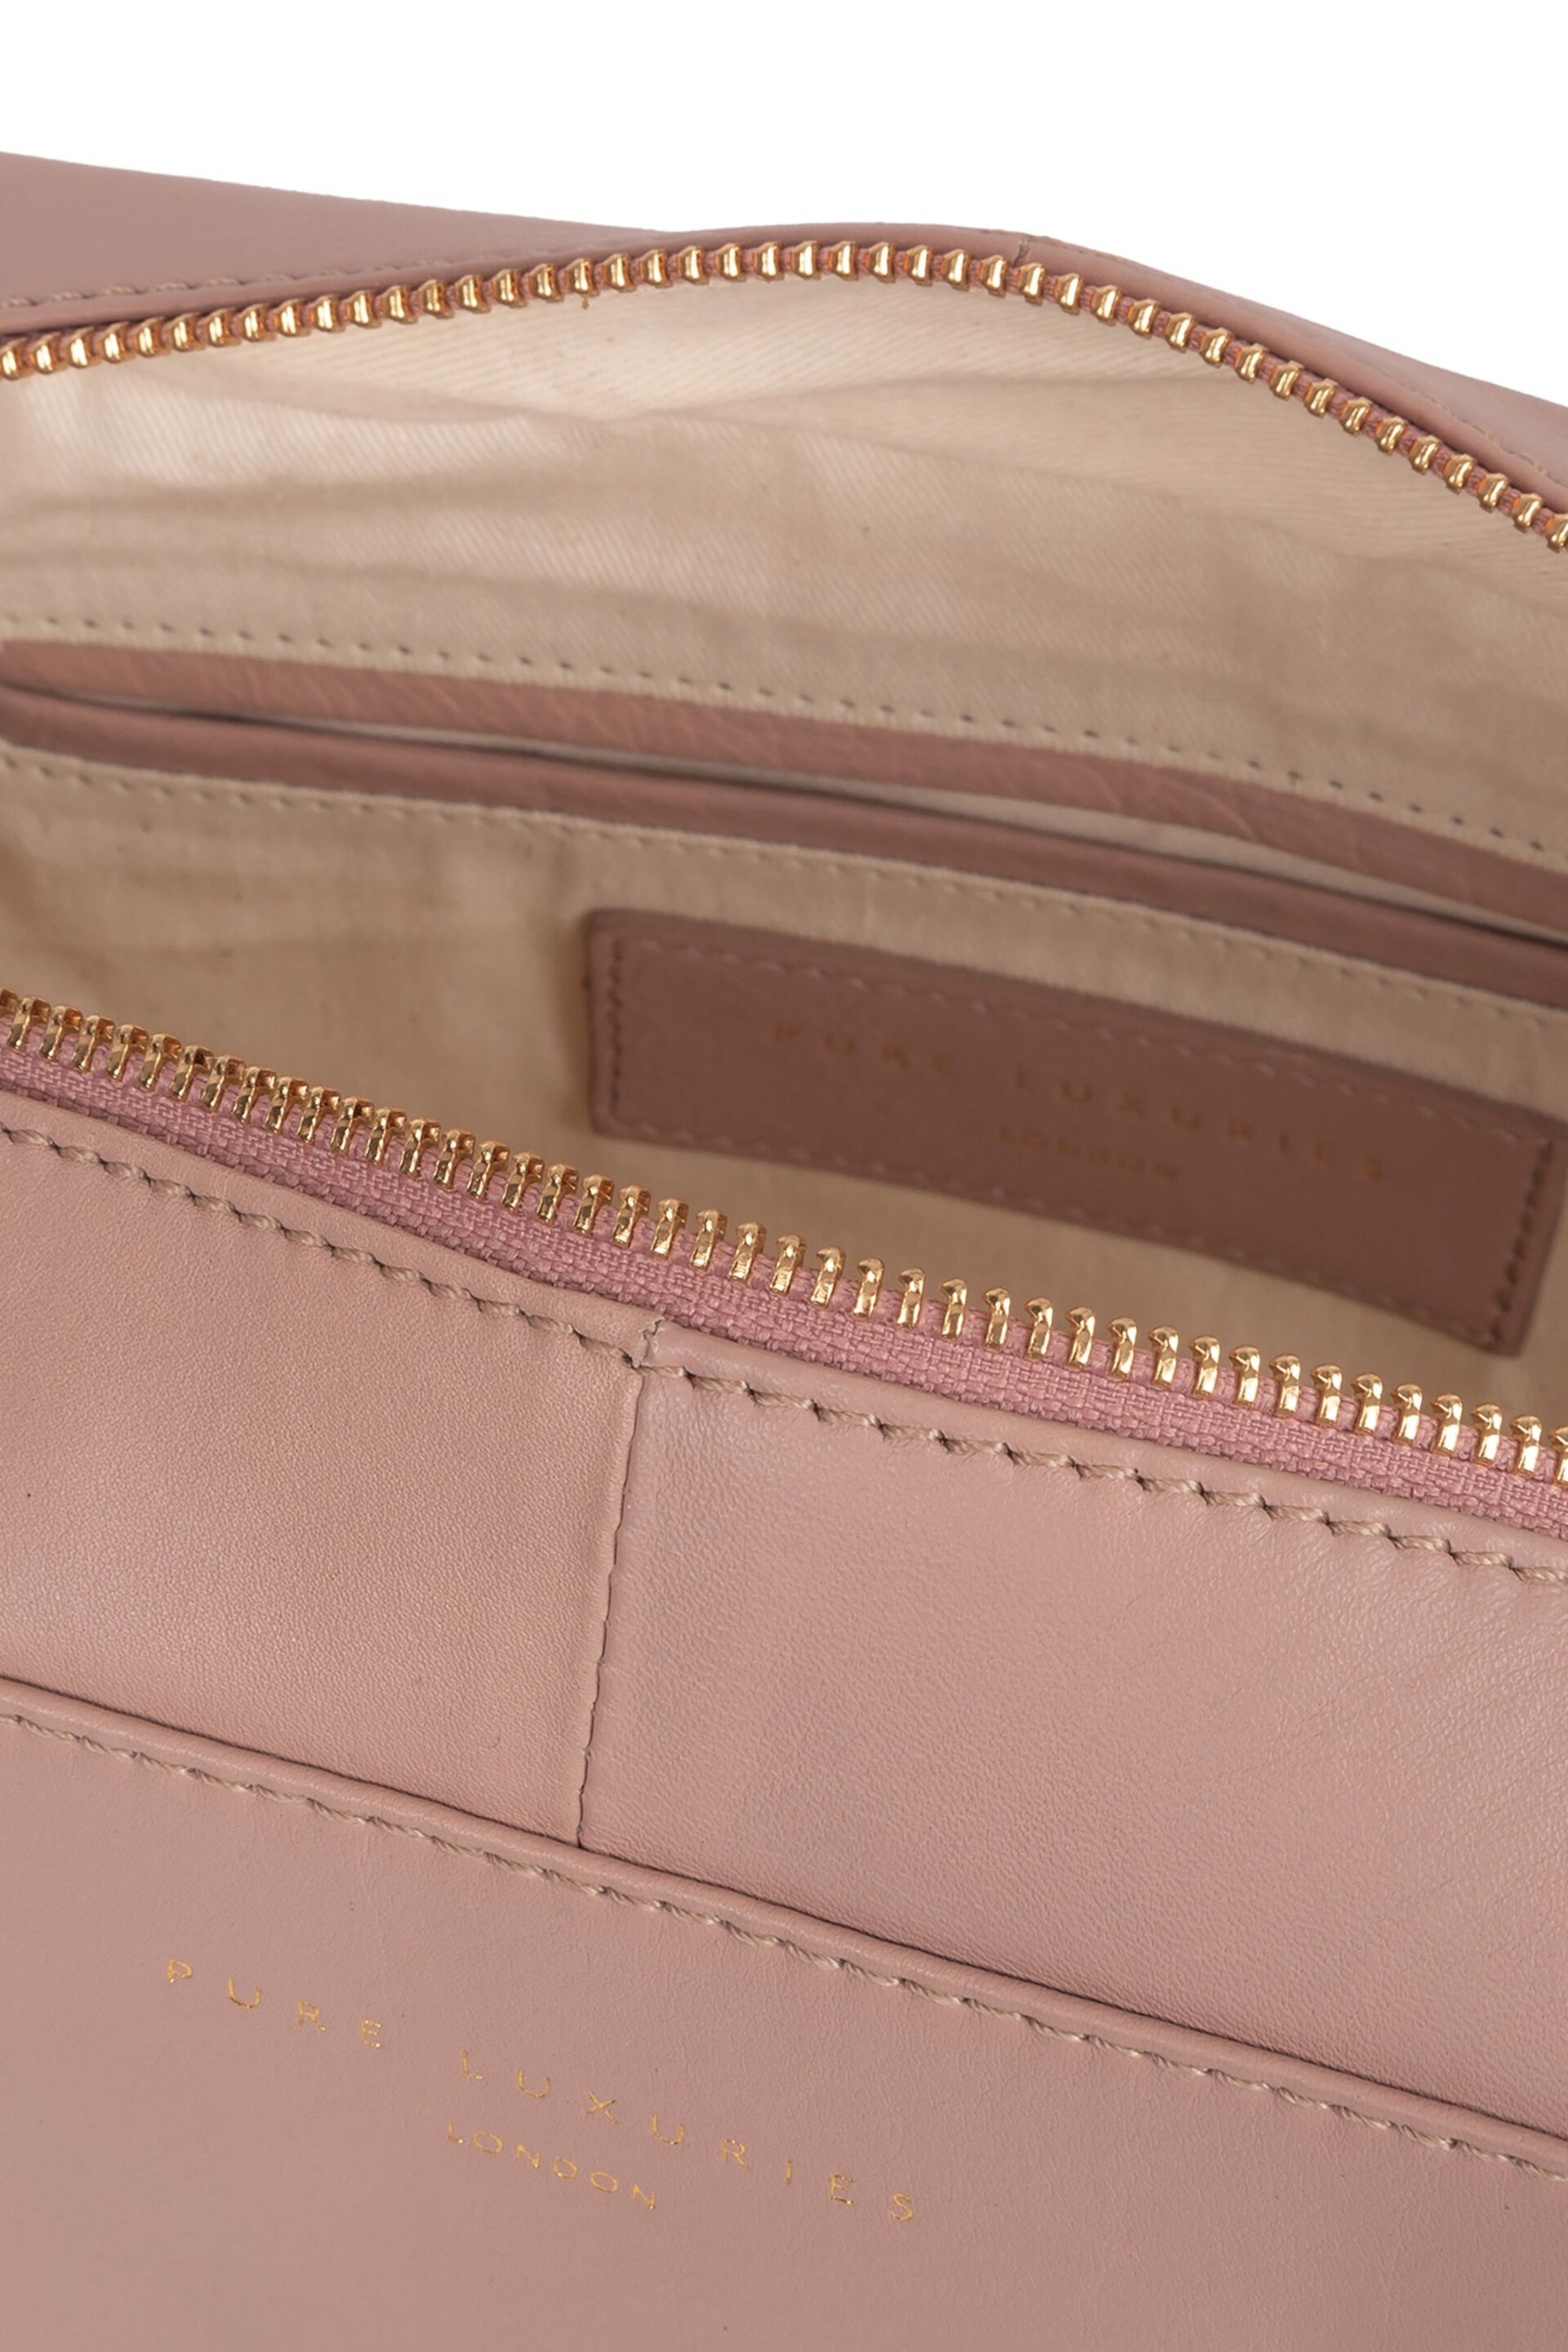 Pure Luxuries London Brompton Leather Cosmetic Bag - Image 3 of 6